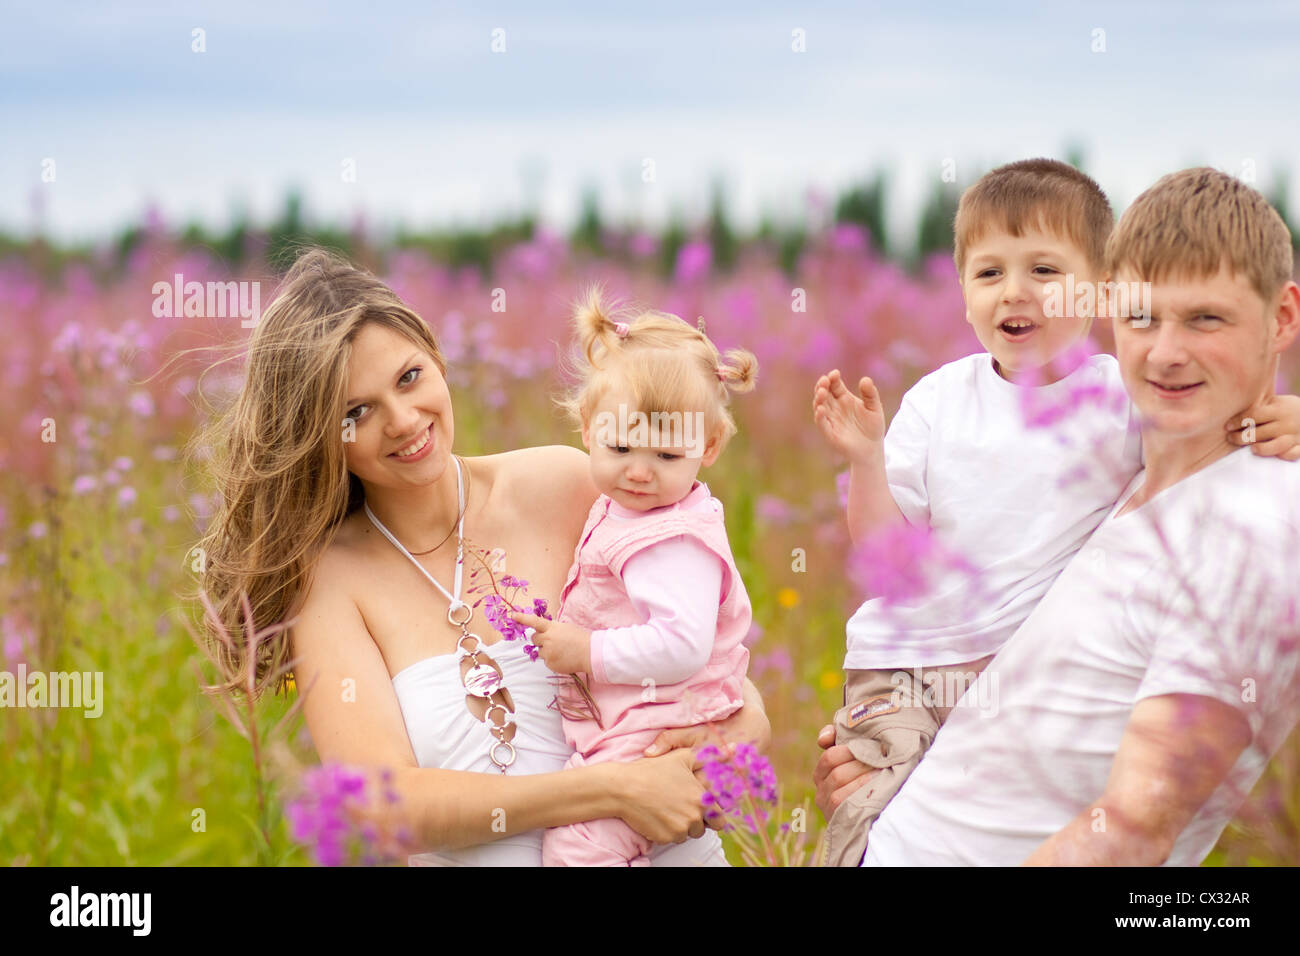 Happy Family together in meadow Banque D'Images